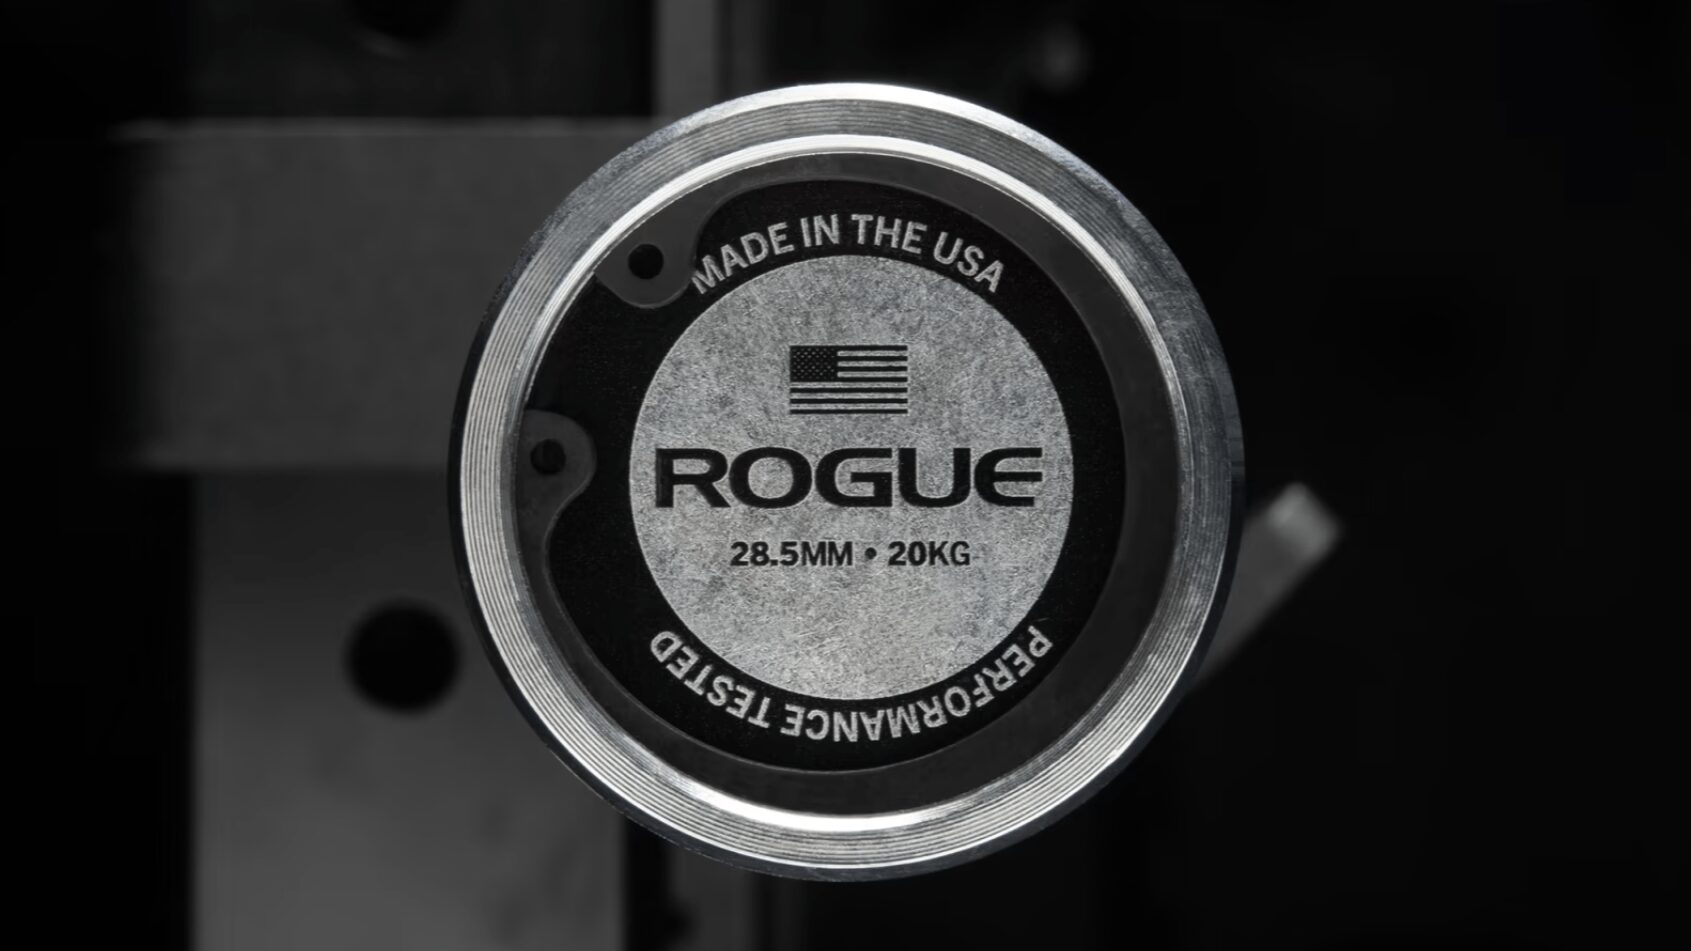 rogue barbell endcap showing the weight of the bar